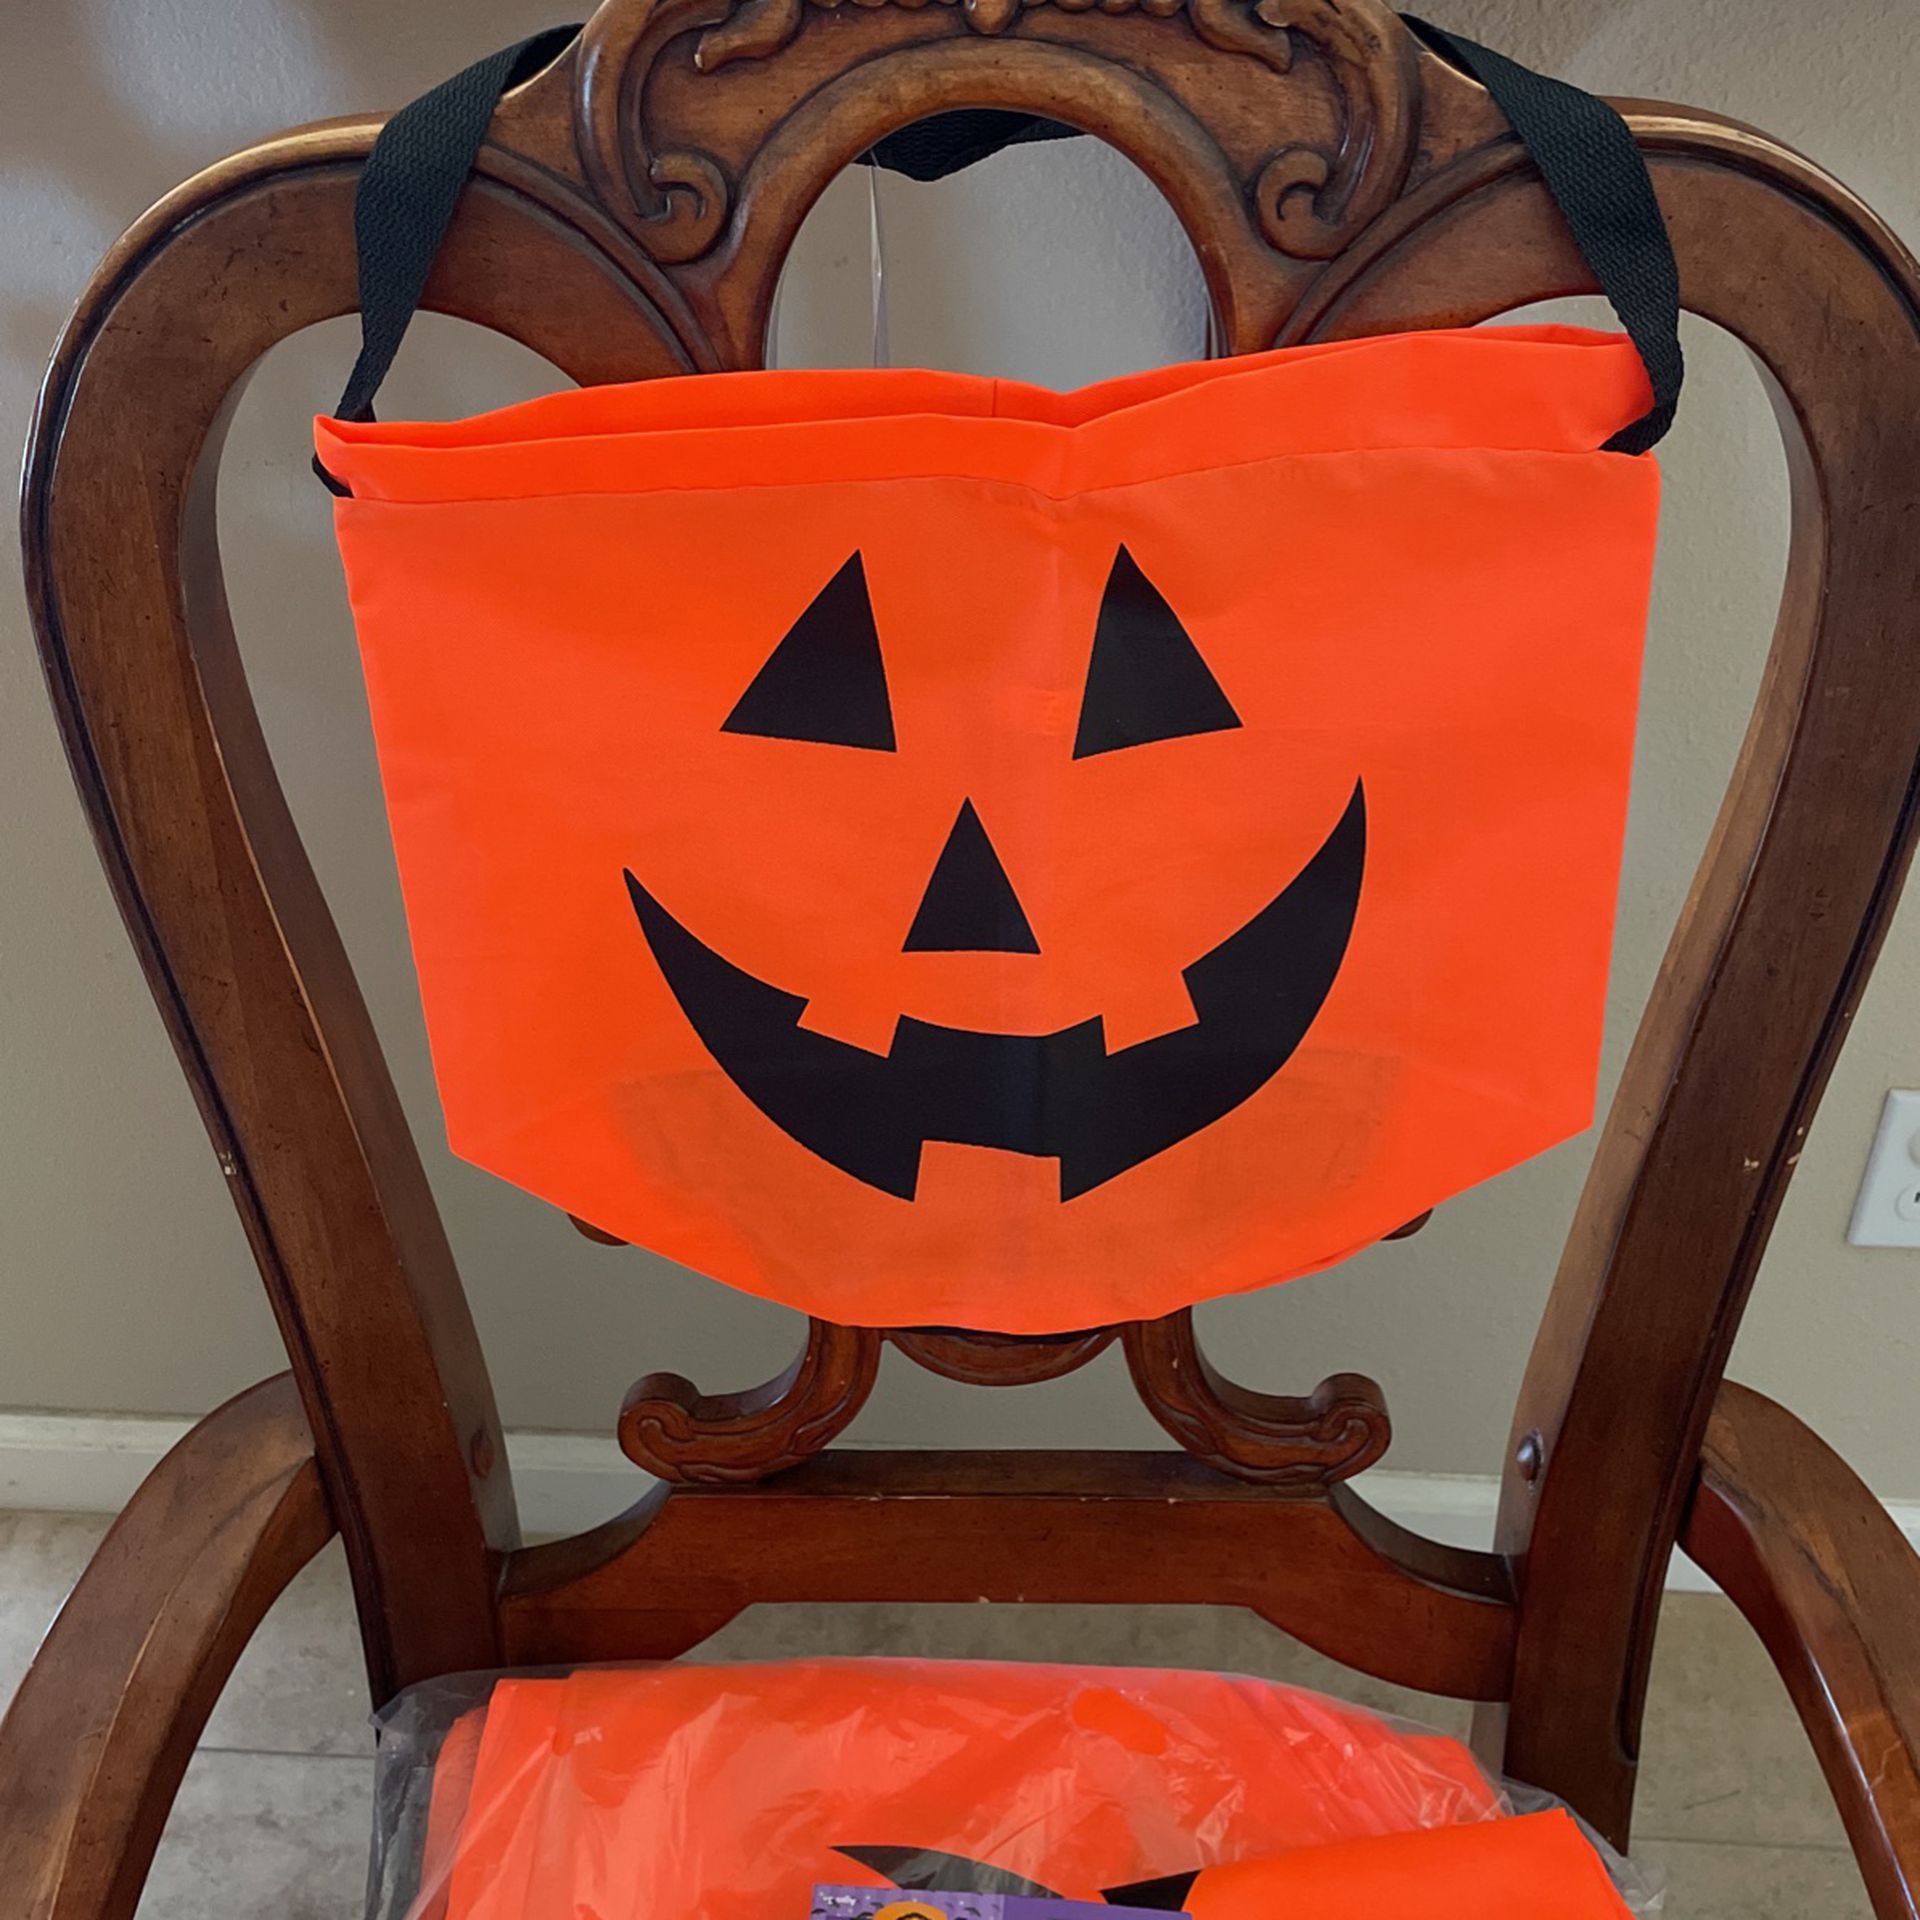 New Build A Bear Workshop Holloween Trick Or Treat Candy Bag